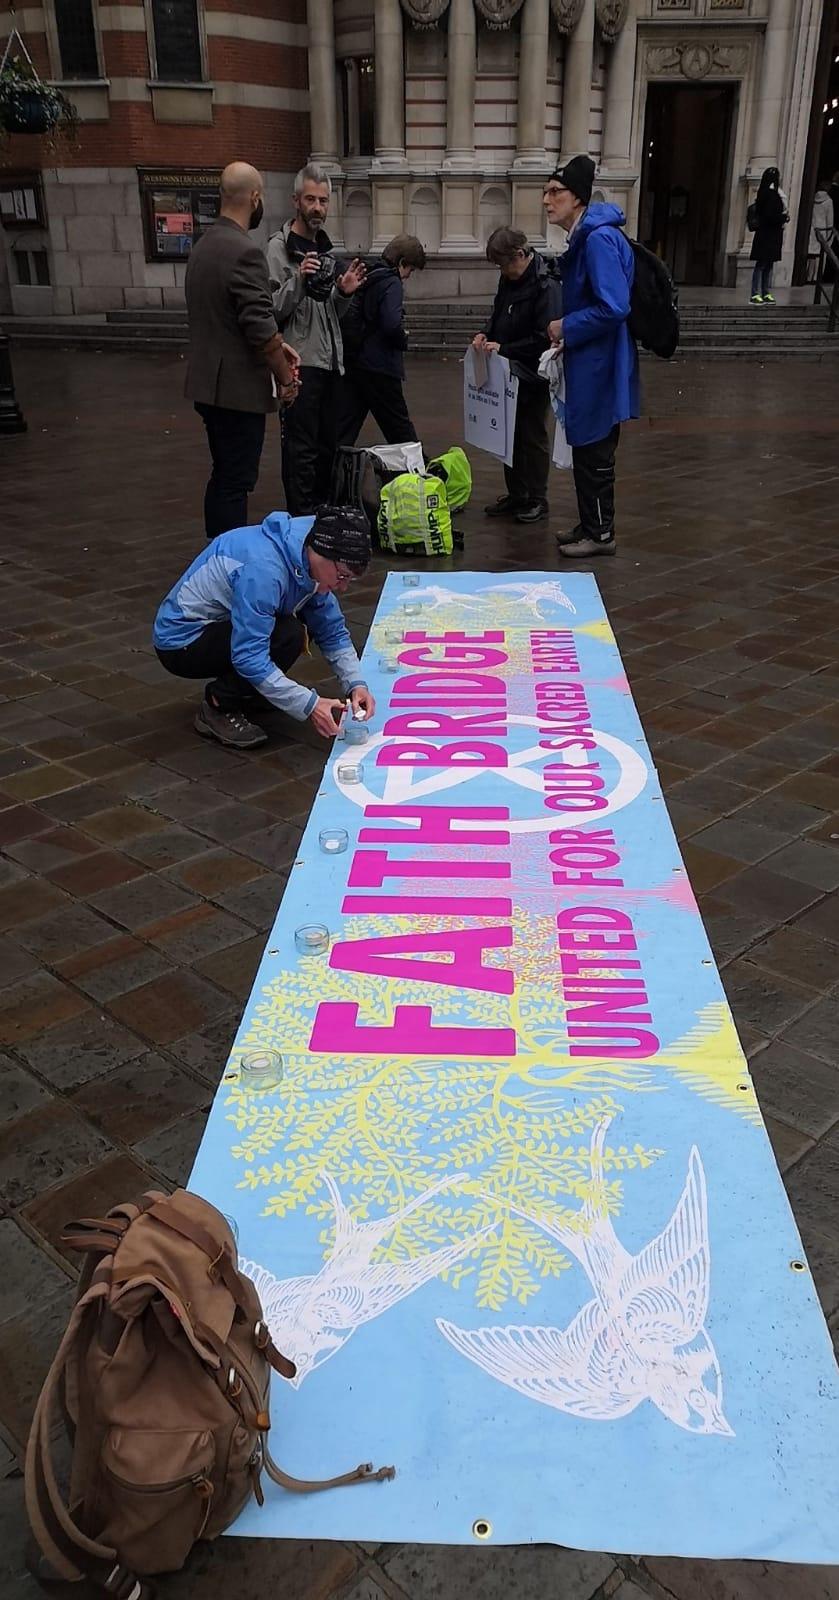 Extinction Rebellion at Westminster Cathedral